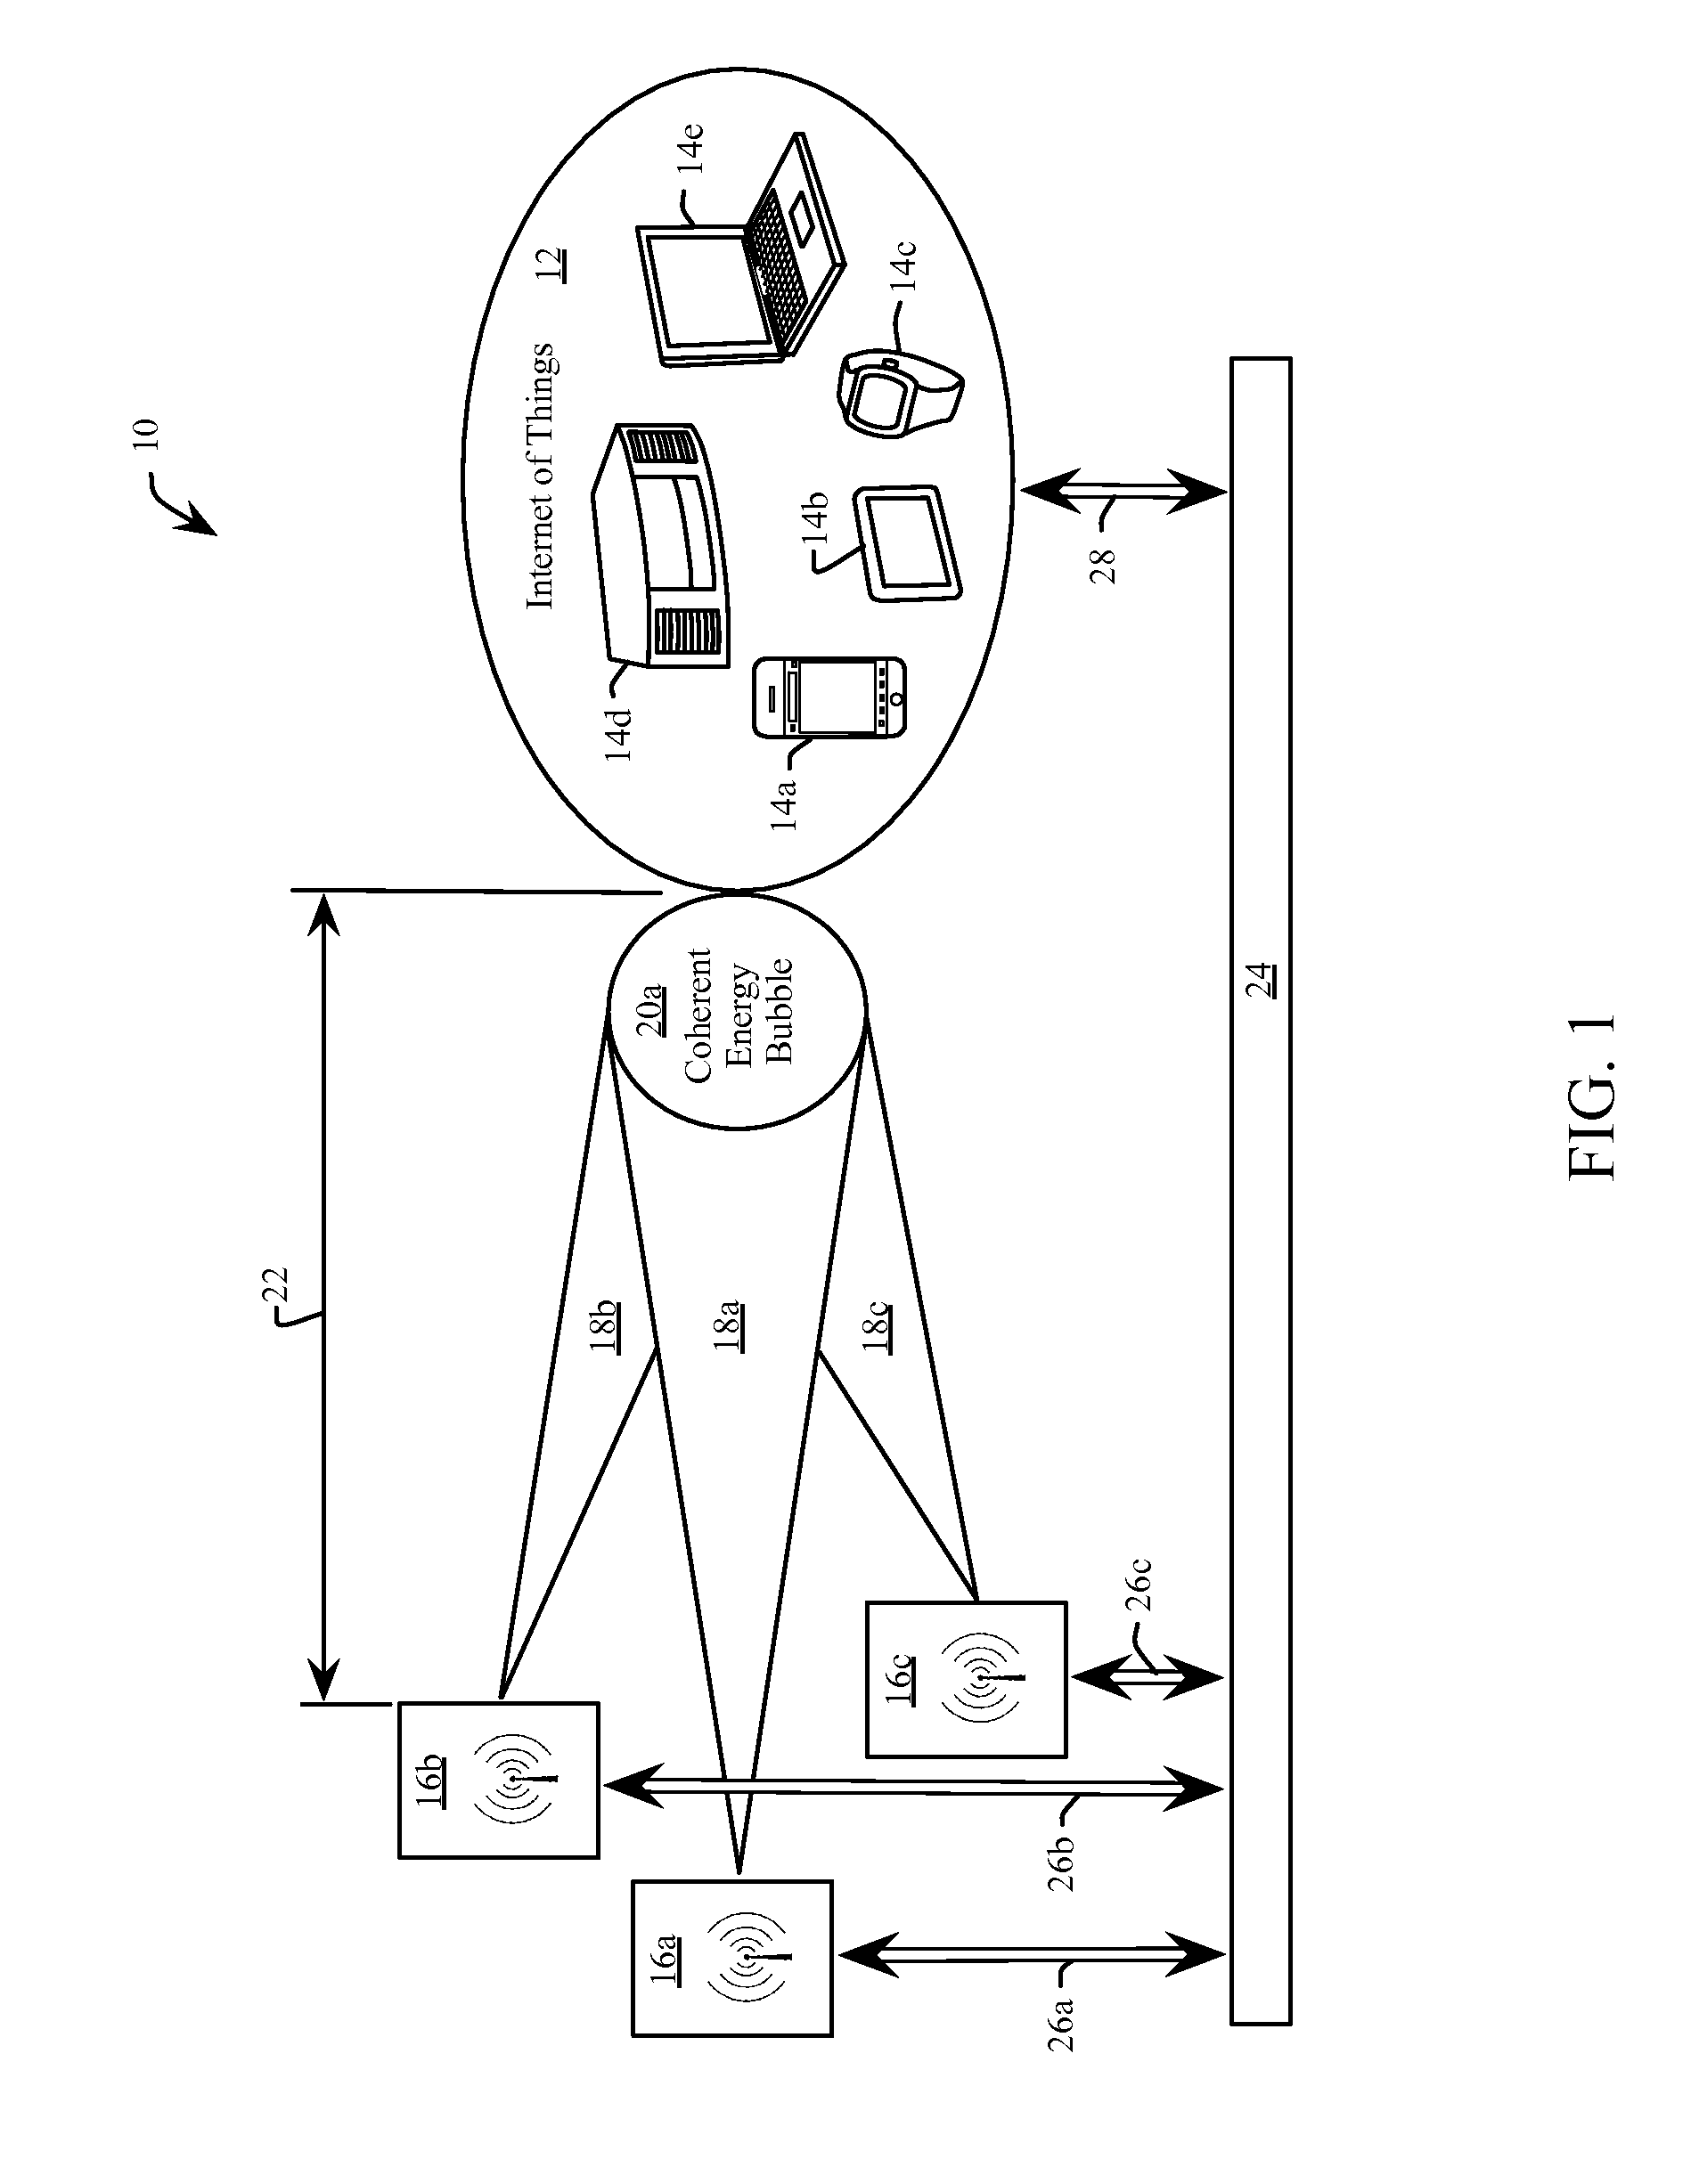 Wireless Energy Transfer Using Alignment Of Electromagnetic Waves